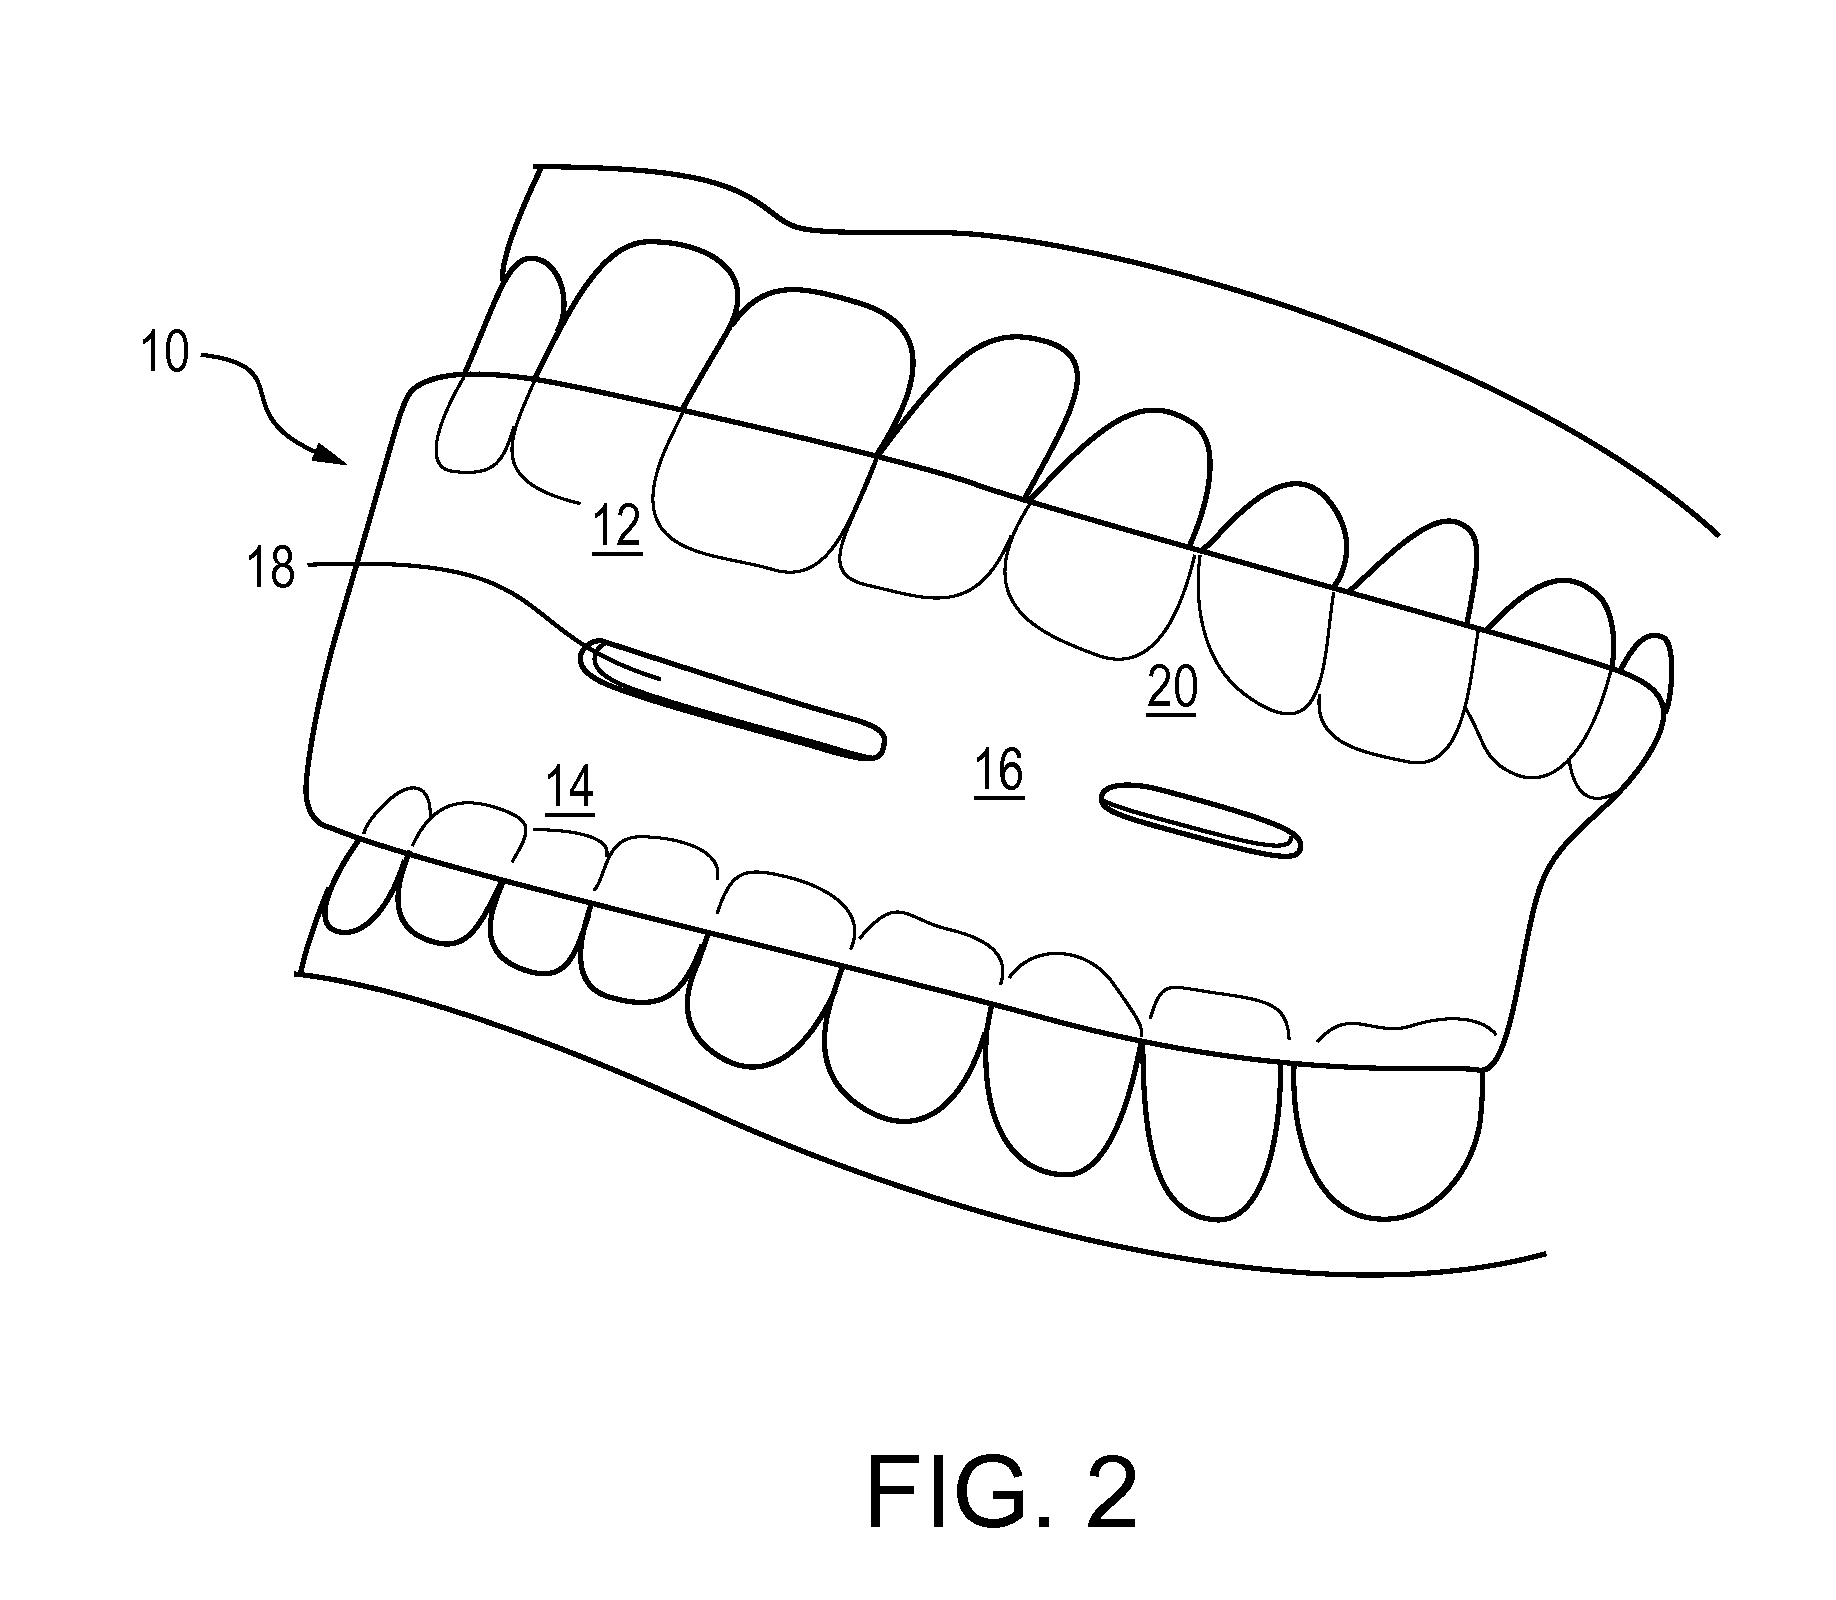 Apparatus and method for treatment of sleep apnea and snoring